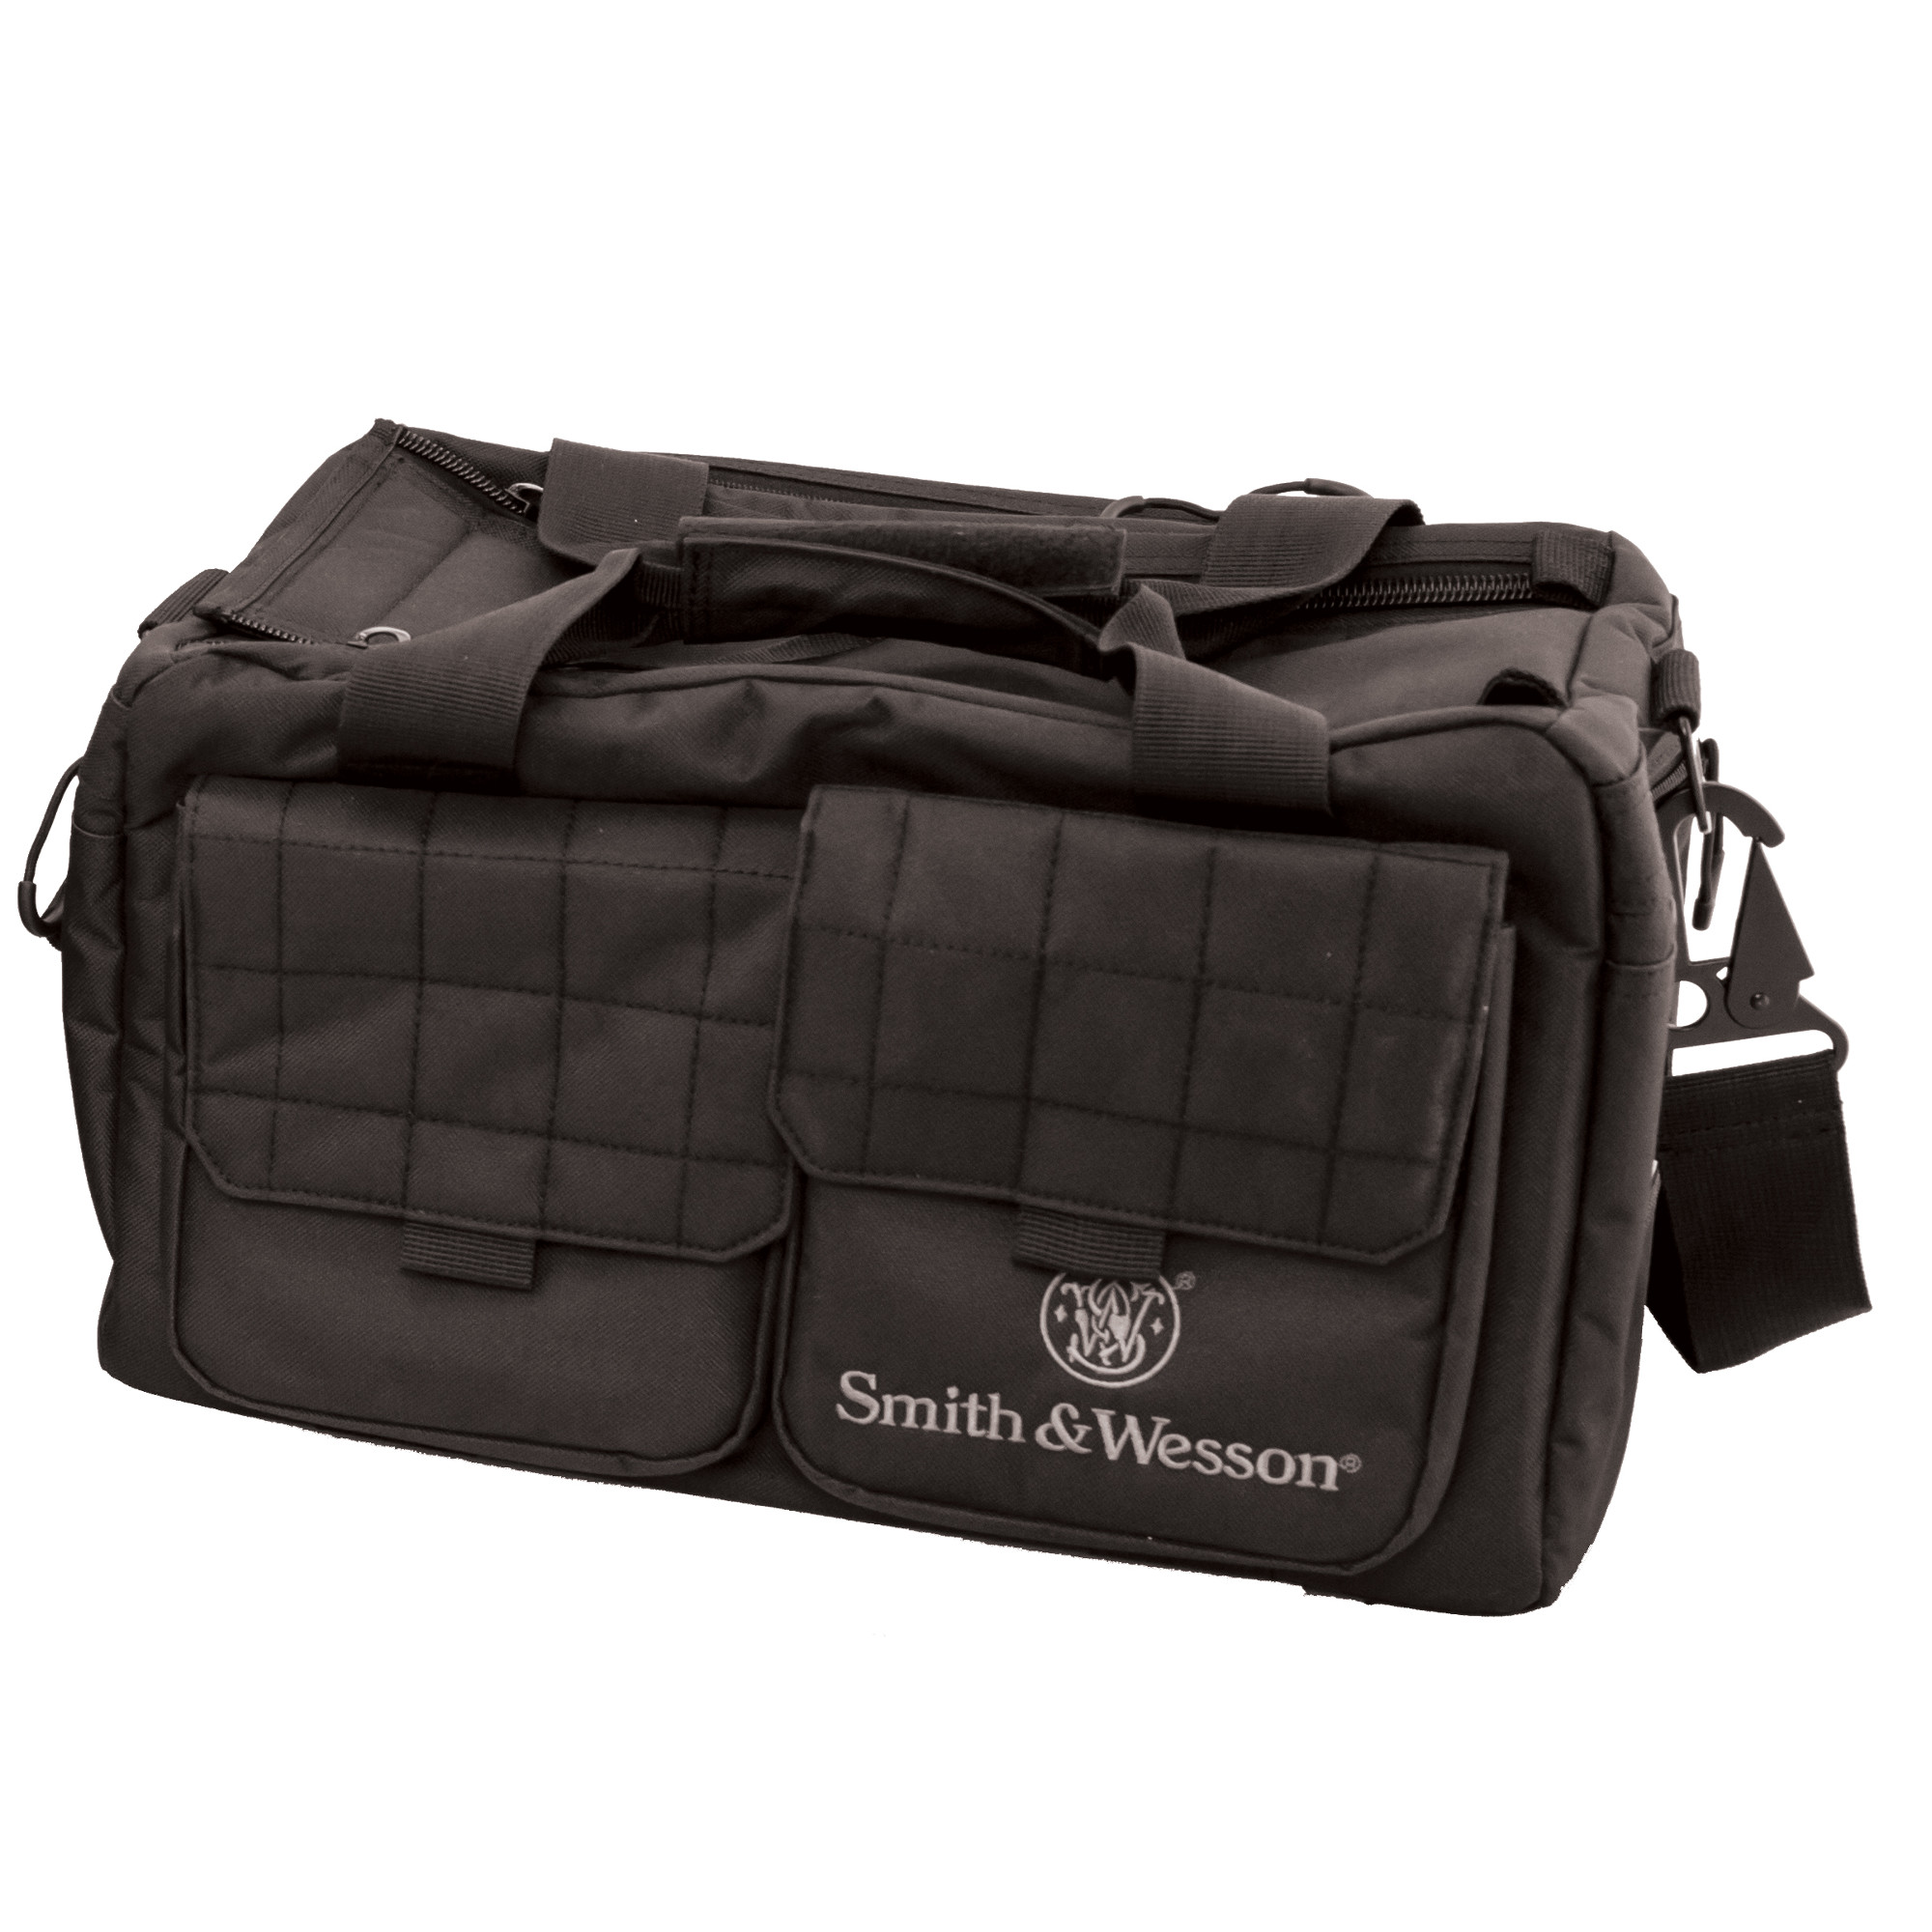 Smith  Wesson Recruit Tactical Range Bag  Smith  Wesson